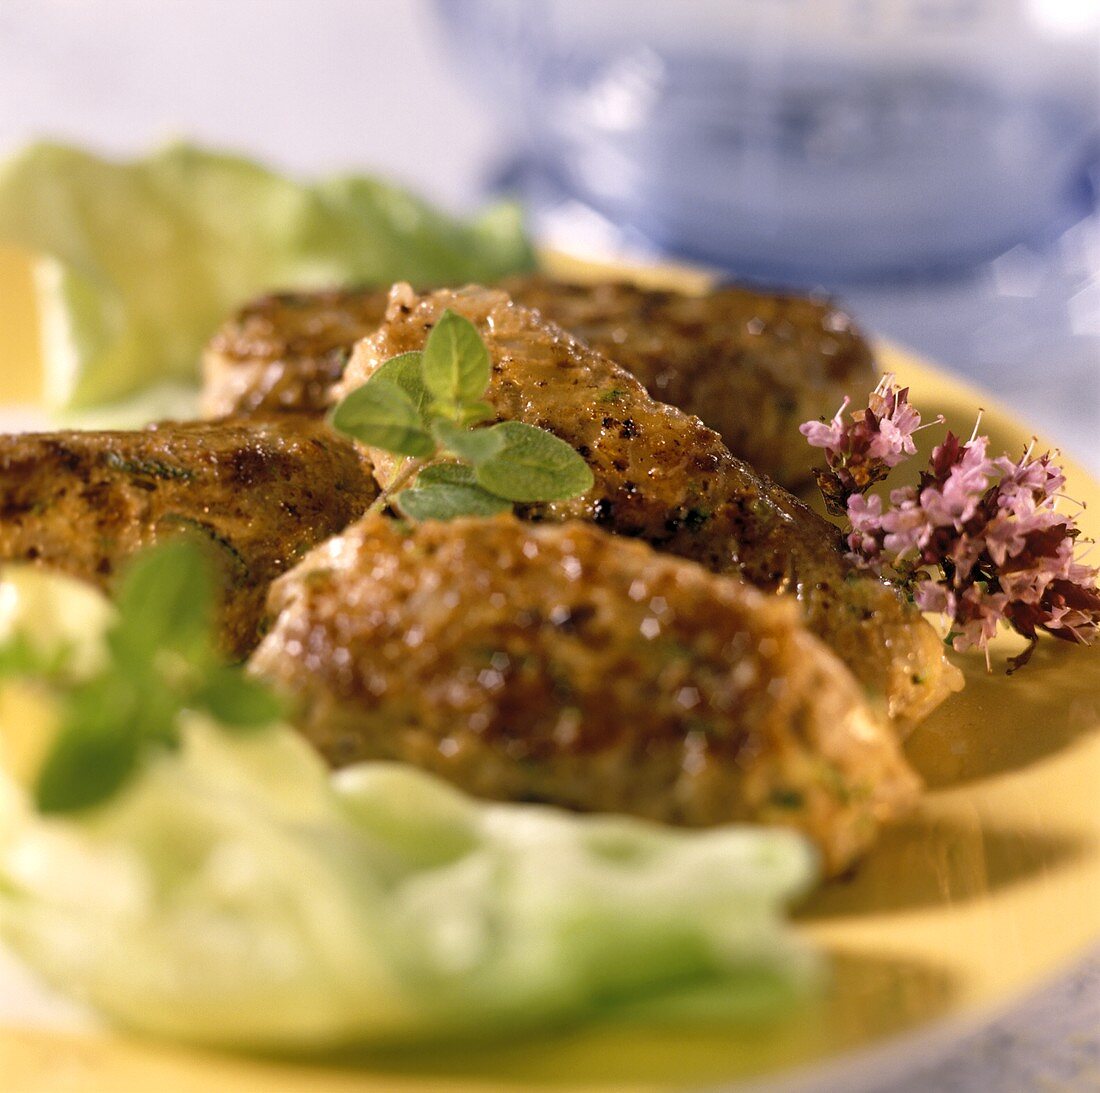 Grilled cevapcici with salad leaves on plate